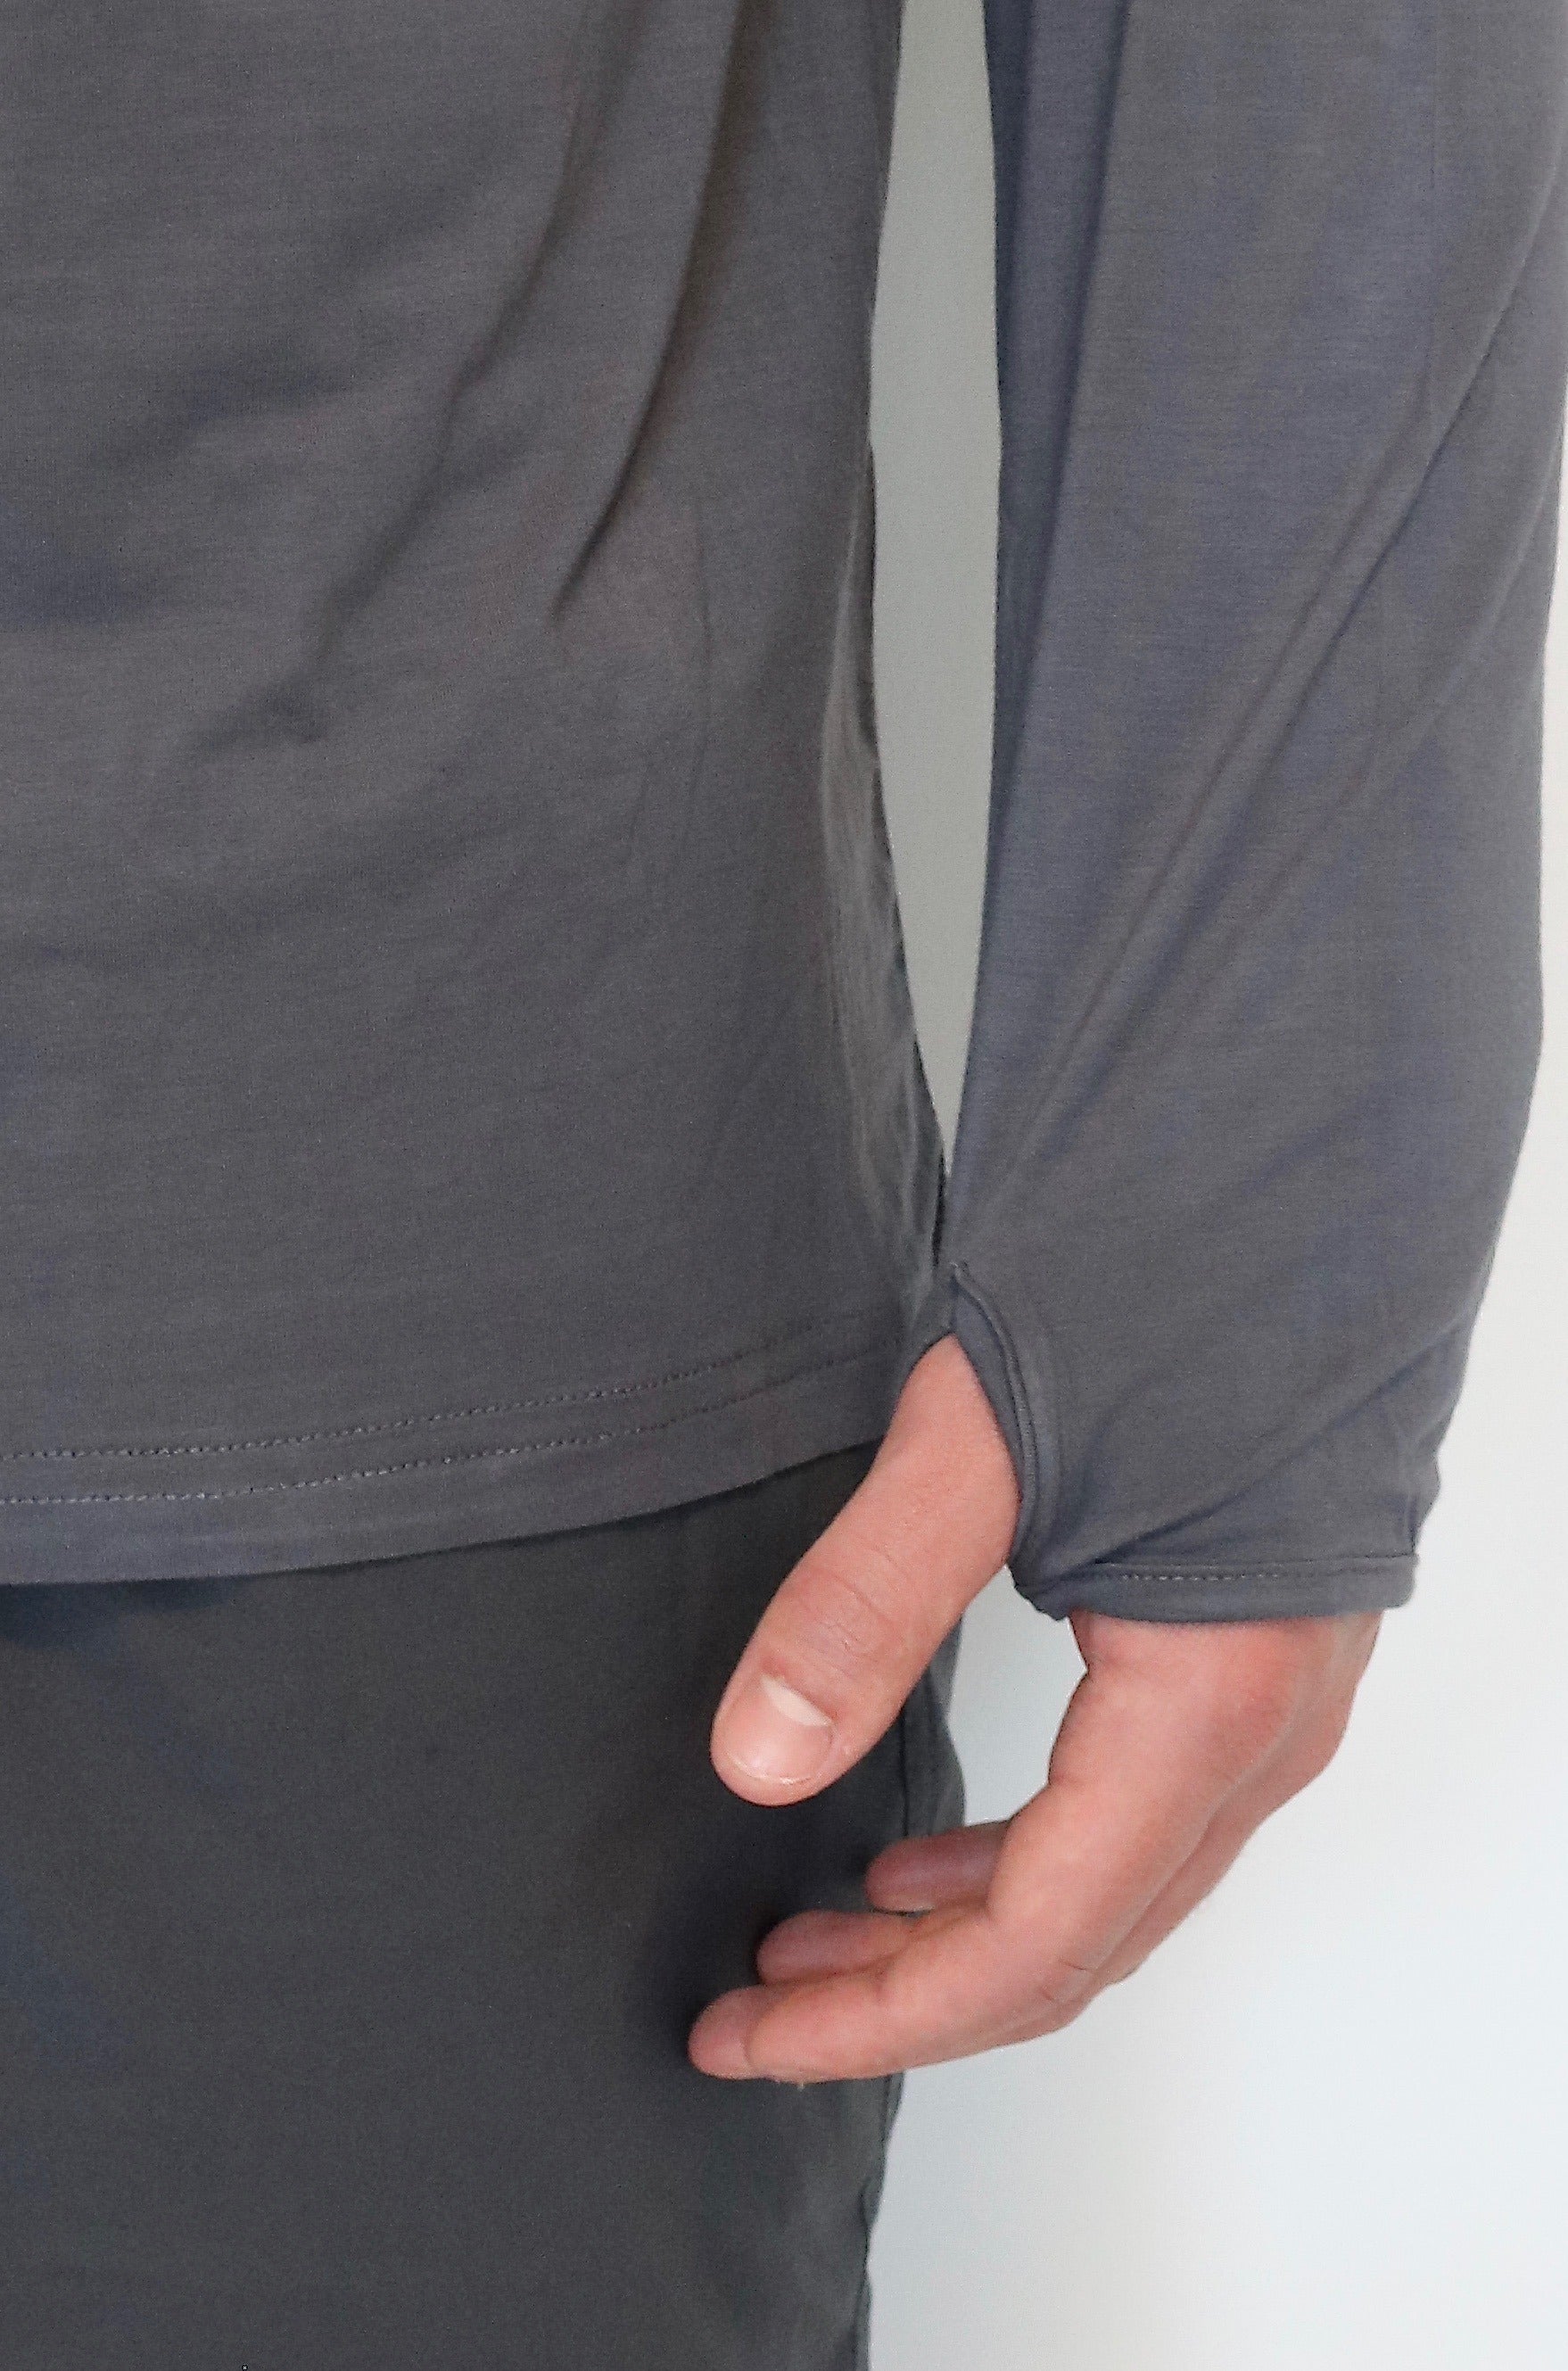 Thumbhole of the Angler Crossover Bamboo Hoodie in Charcoal. This sun hoodie provides great sun coverage.